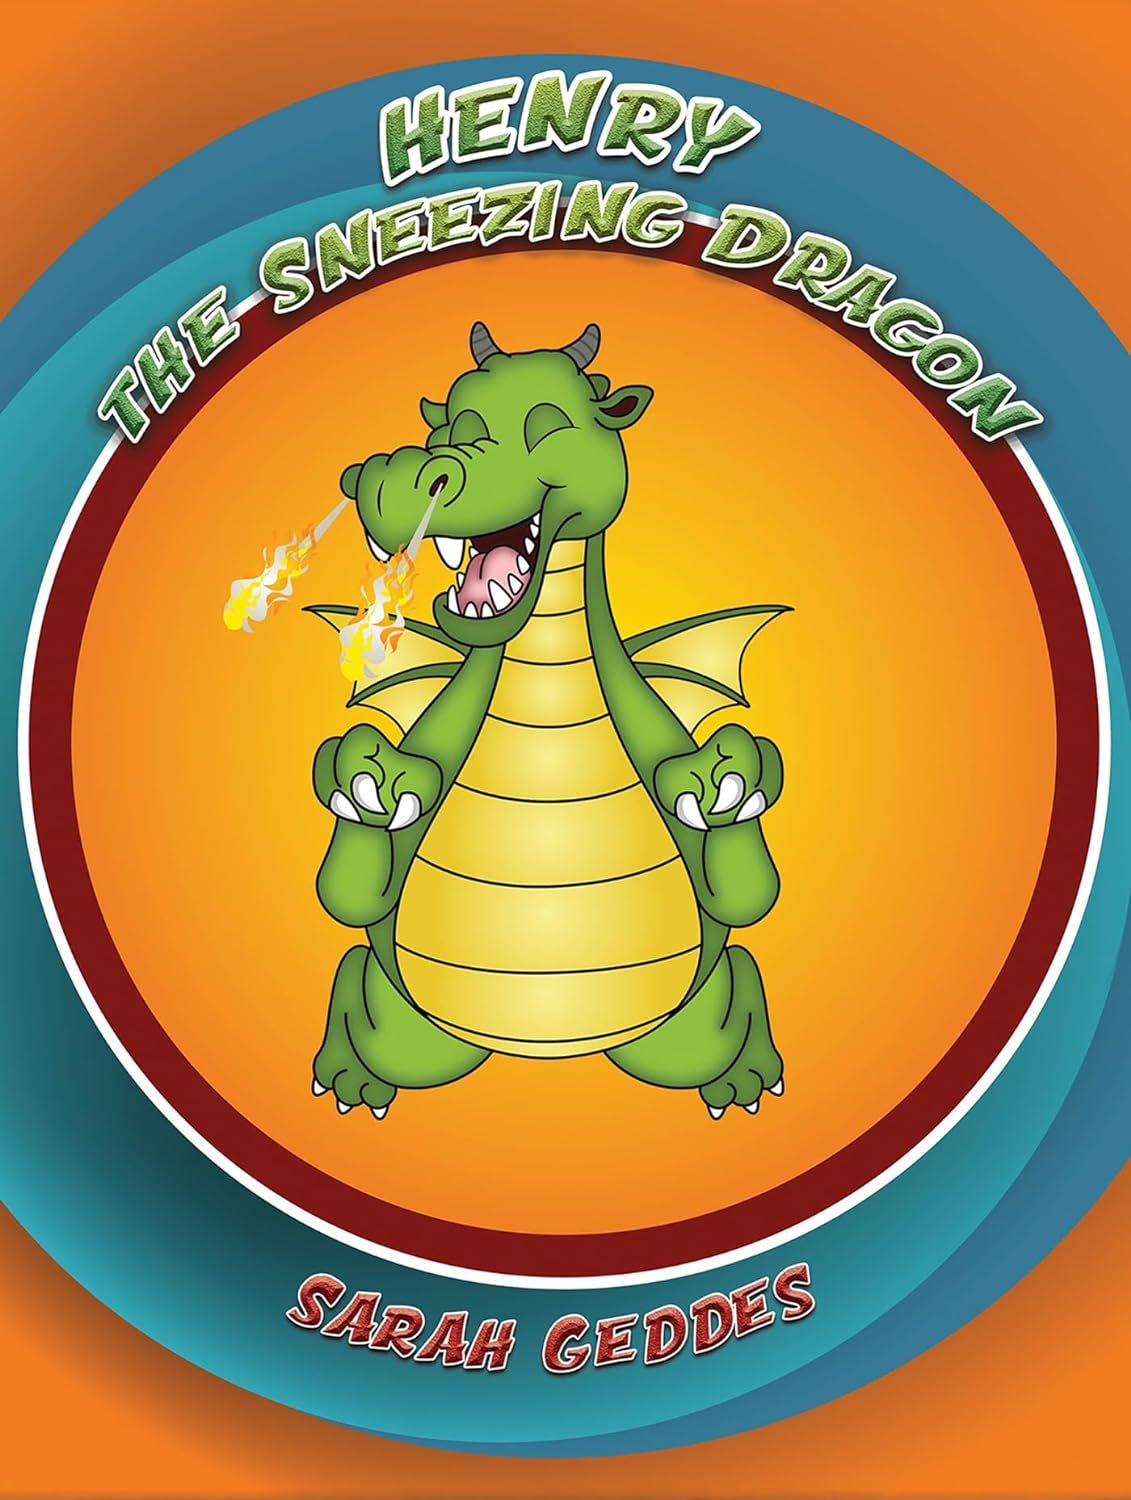 The cover of Henry the sneezing dragon, with a happy dragon snorting fire.